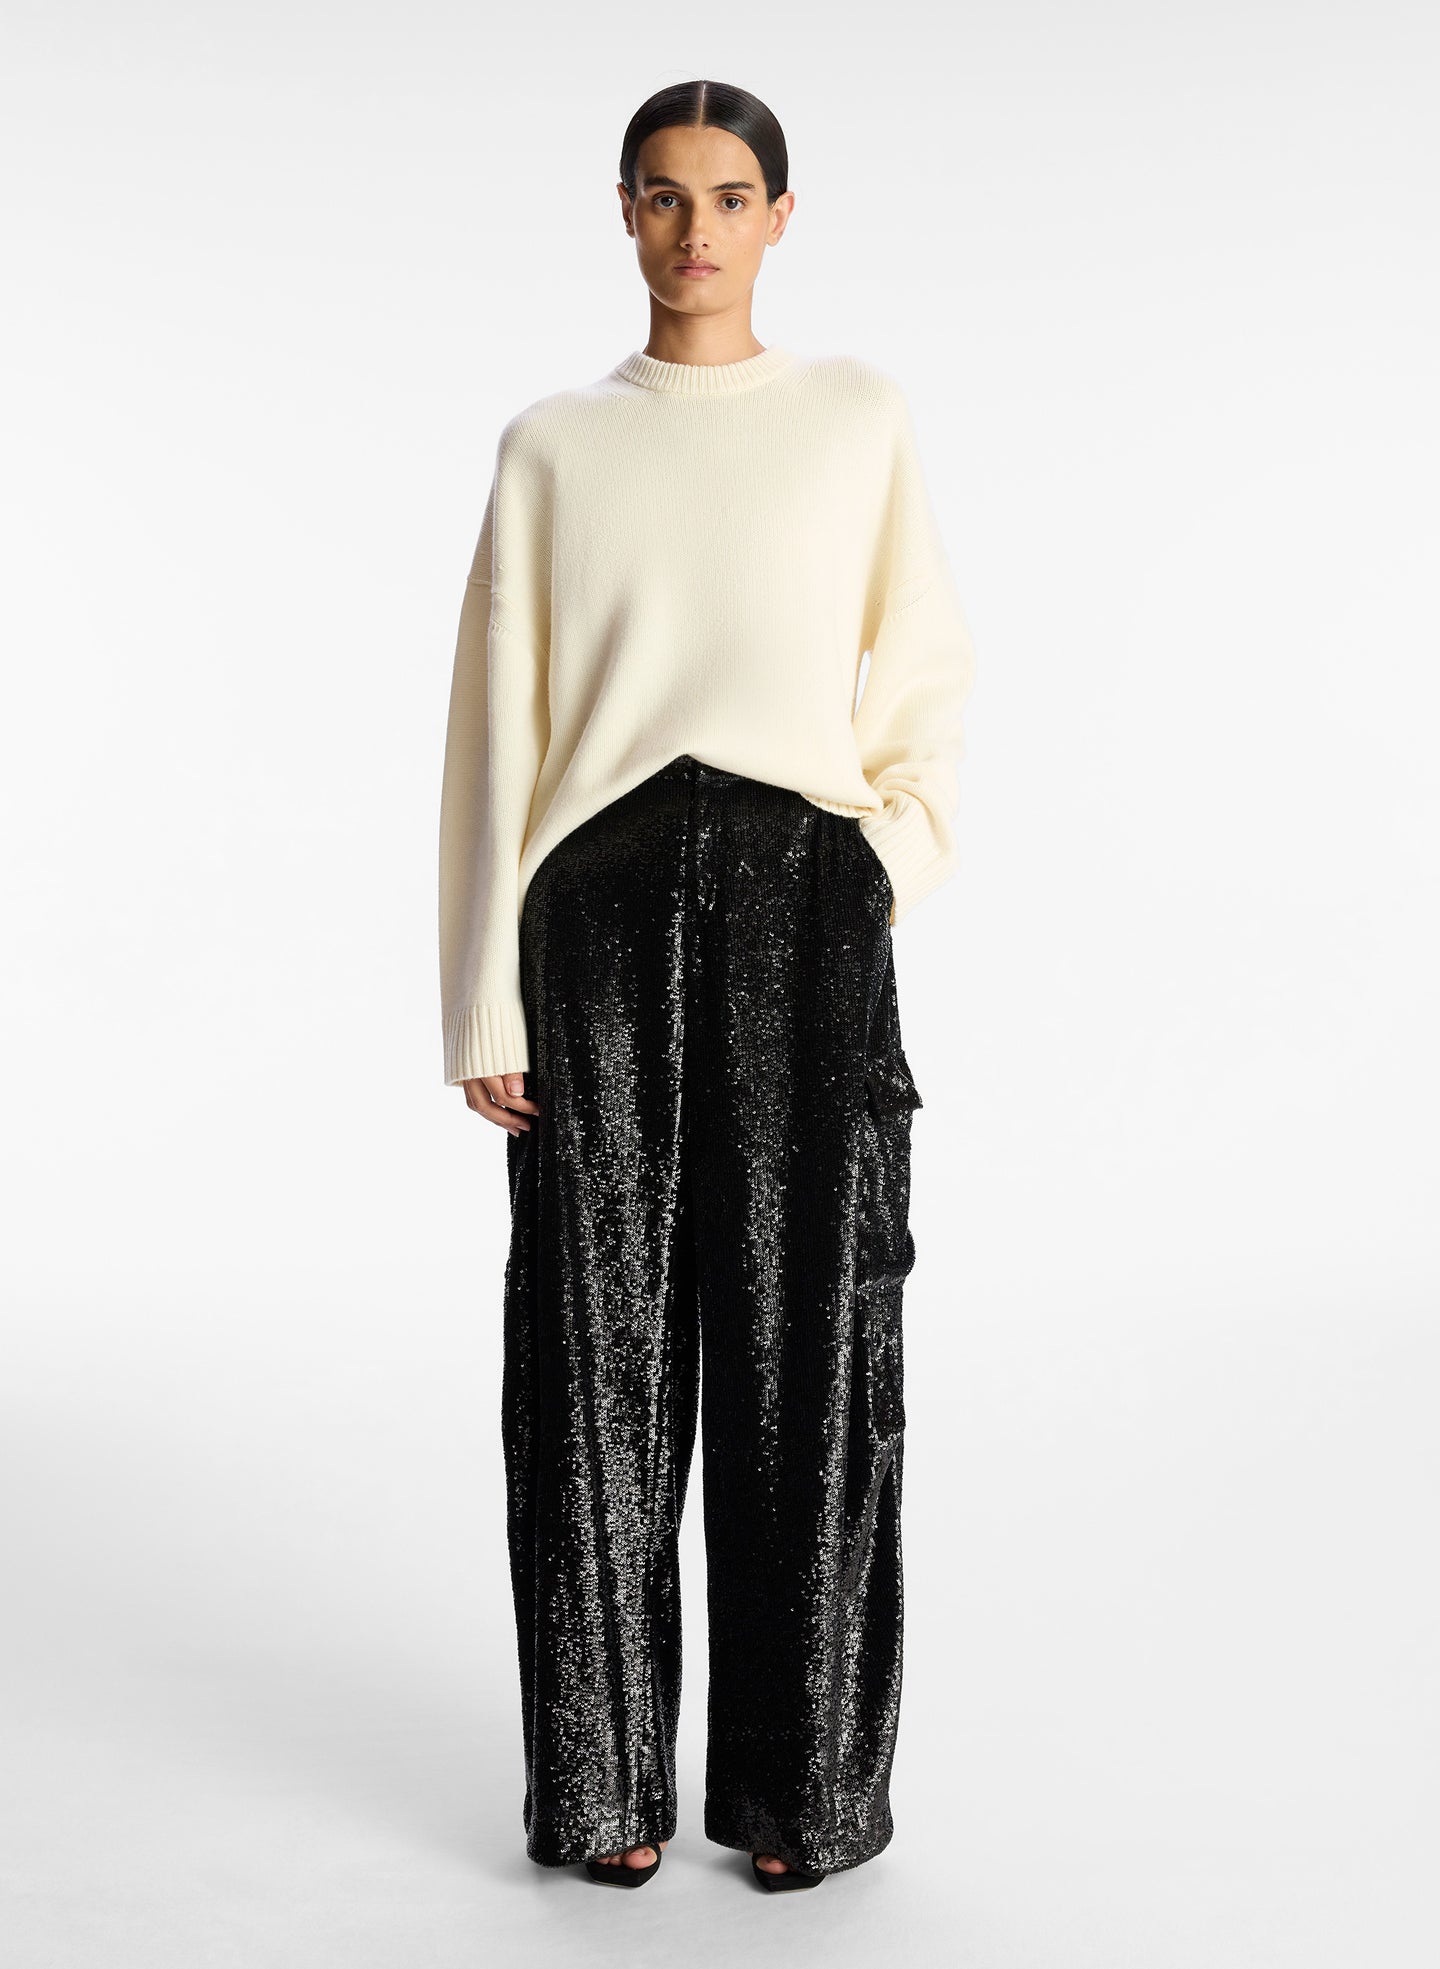 front view of woman wearing cream sweater and black sequined cargo pants